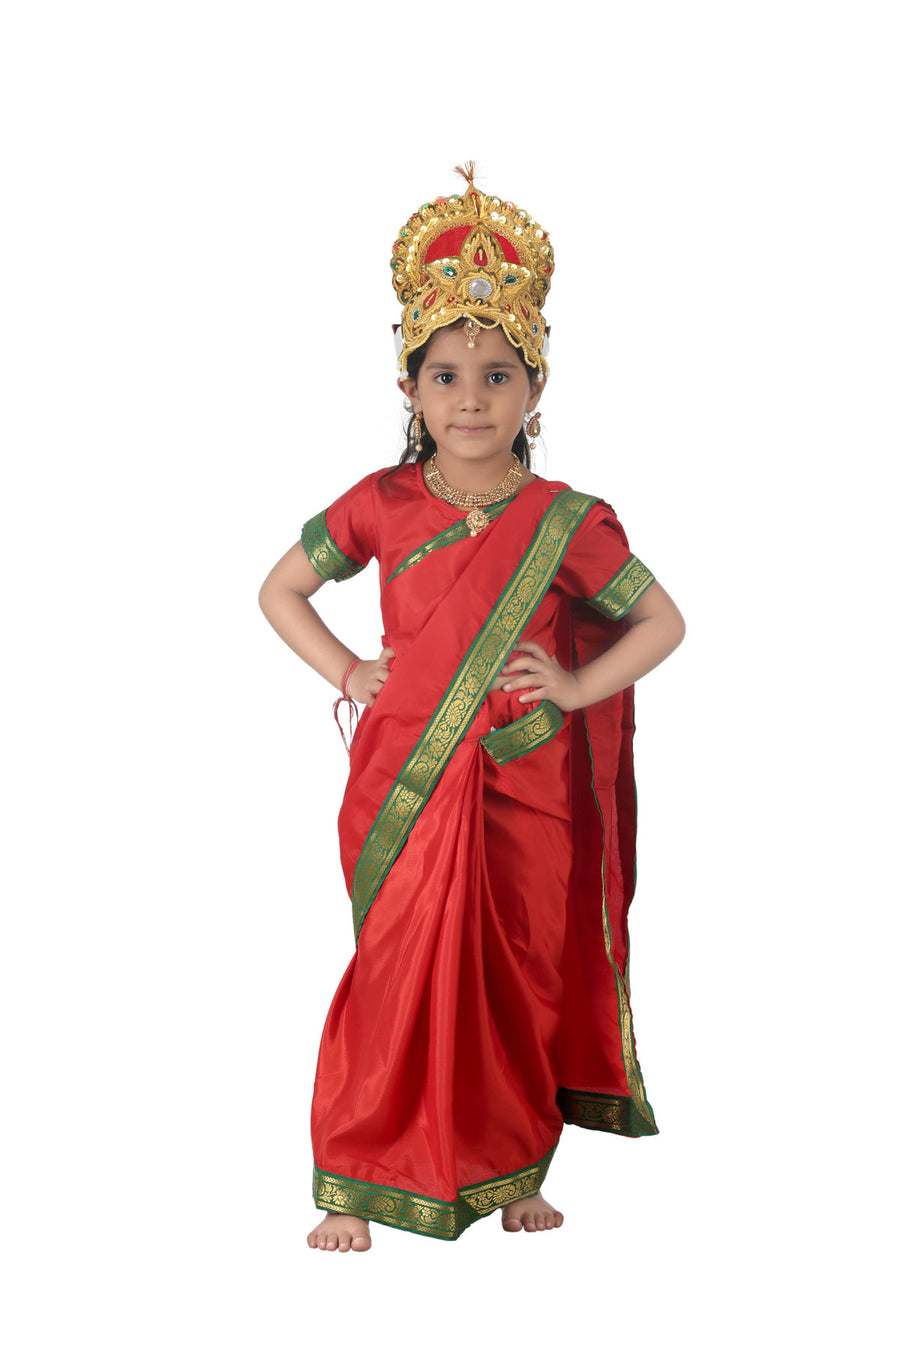 Buy SANSKRITI FANCY DRESSES Vanvasi Sita Saree Fancy Dress Costume  Mythological Costume (6 To 8 Years) Online at Low Prices in India -  Amazon.in